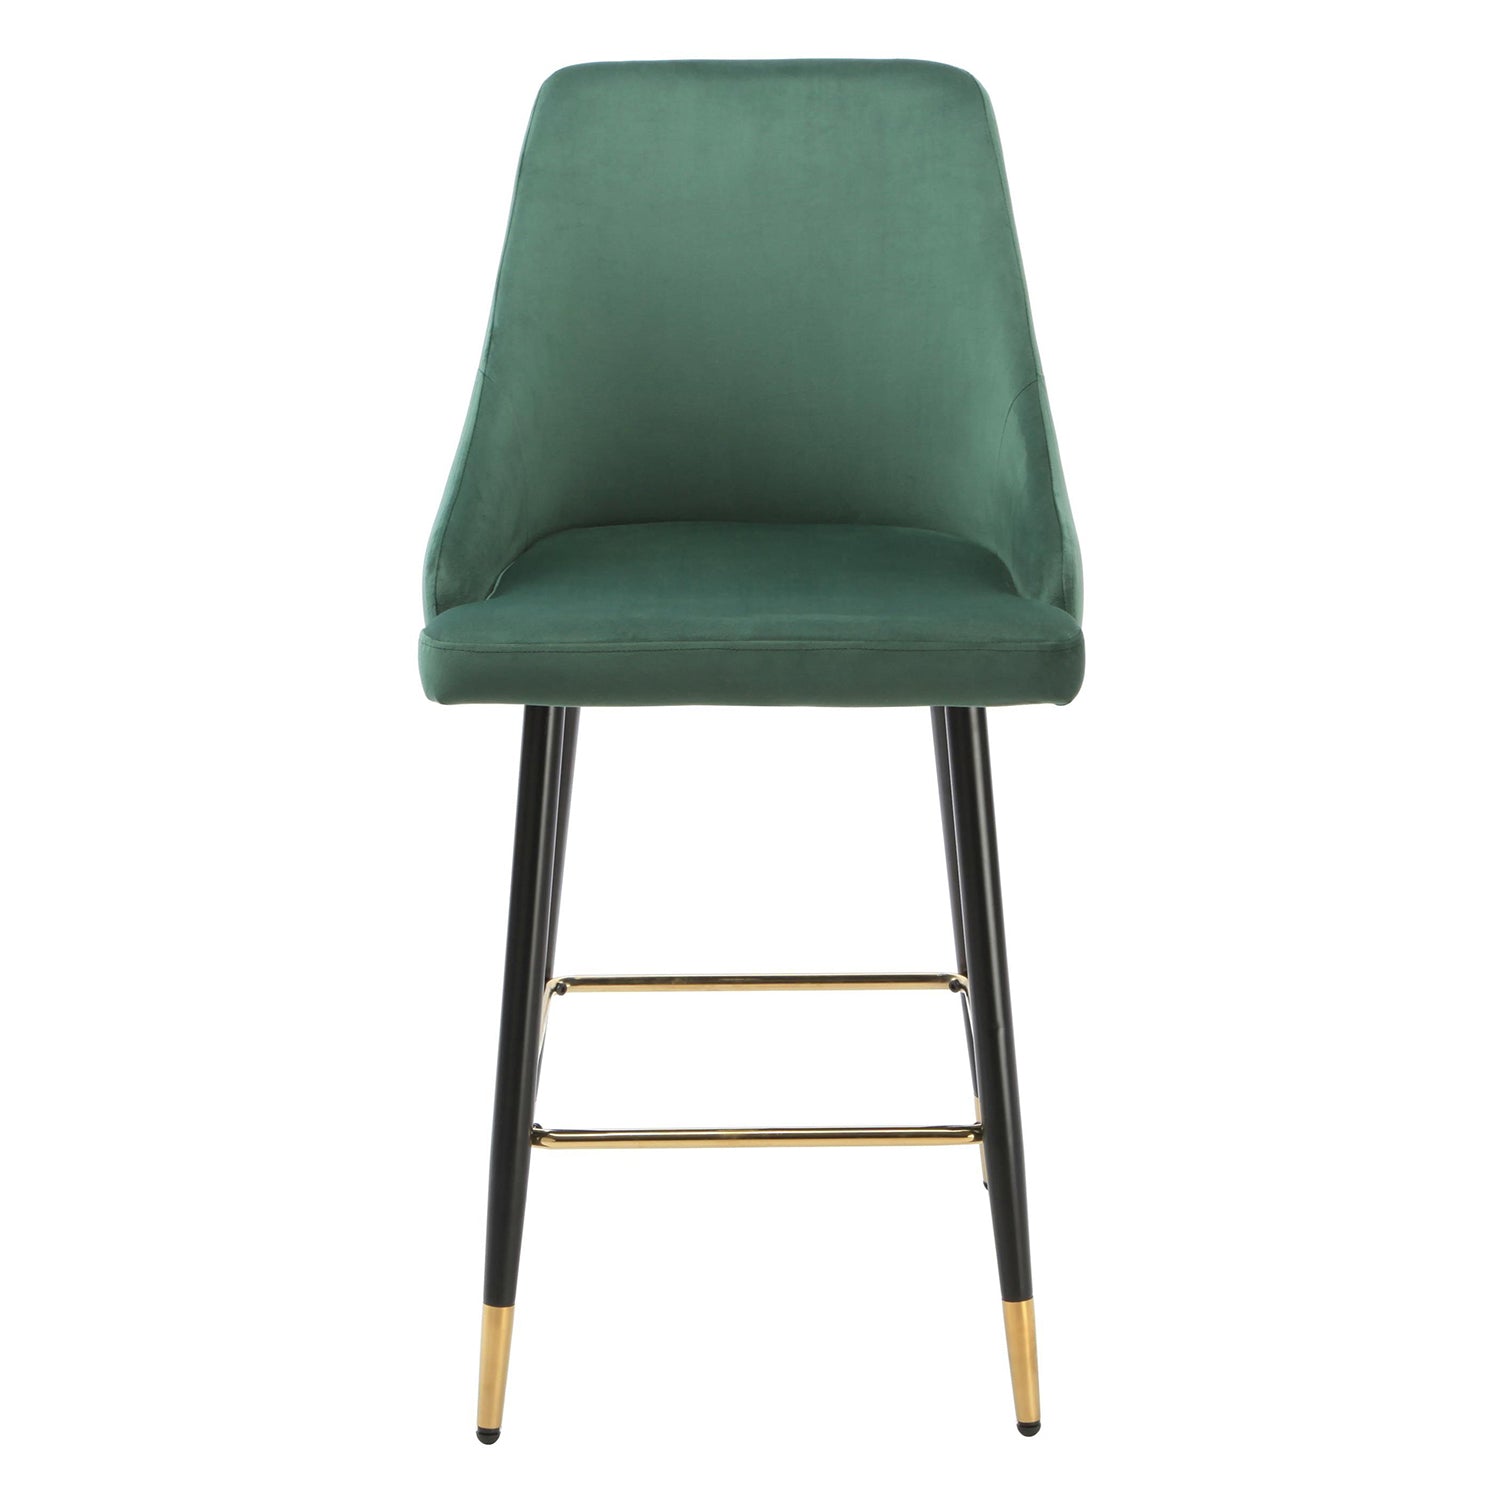 2 Set chesterfield green kitchen bar stool by Native